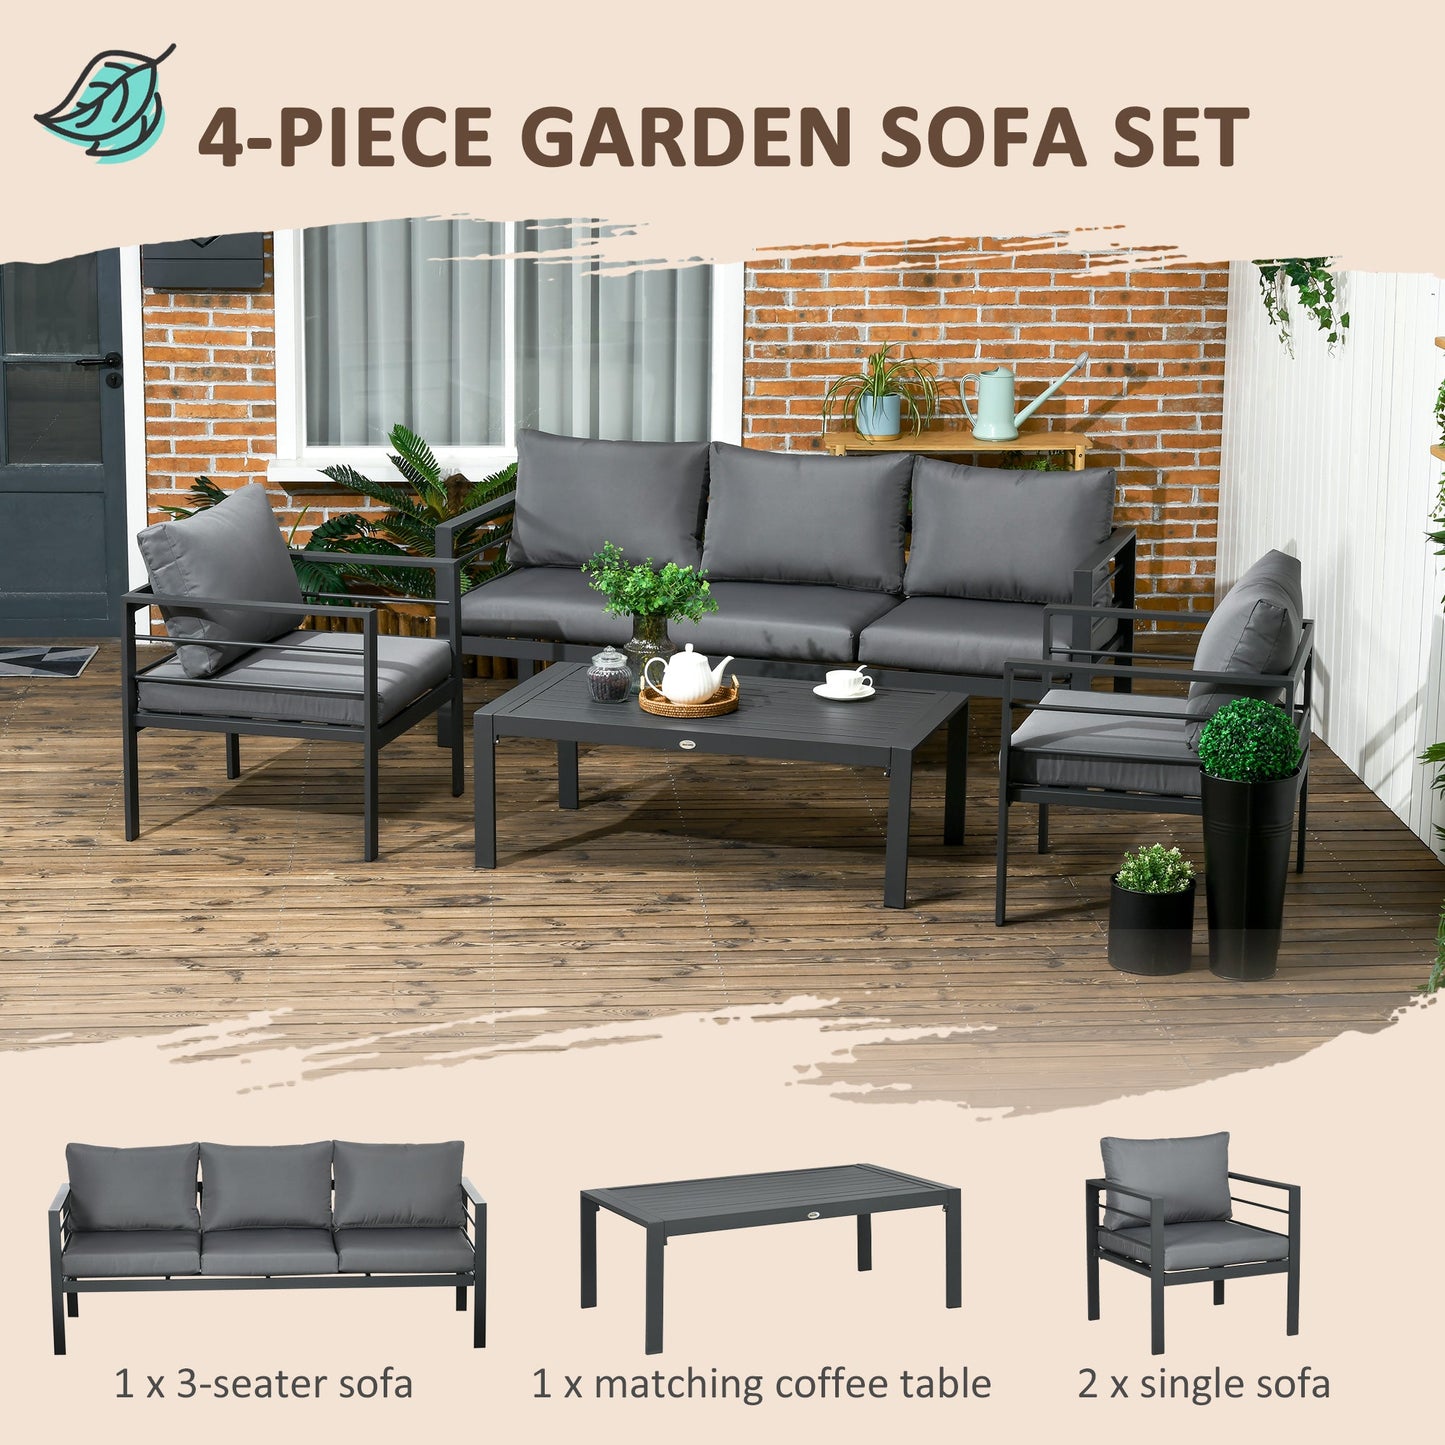 Outdoor and Garden-Patio Furniture Set 4 Pieces, Outdoor Conversation Set with Water-Resistant Cushions, Coffee Table, 3-Seater Sofa, 2 Chairs - Outdoor Style Company